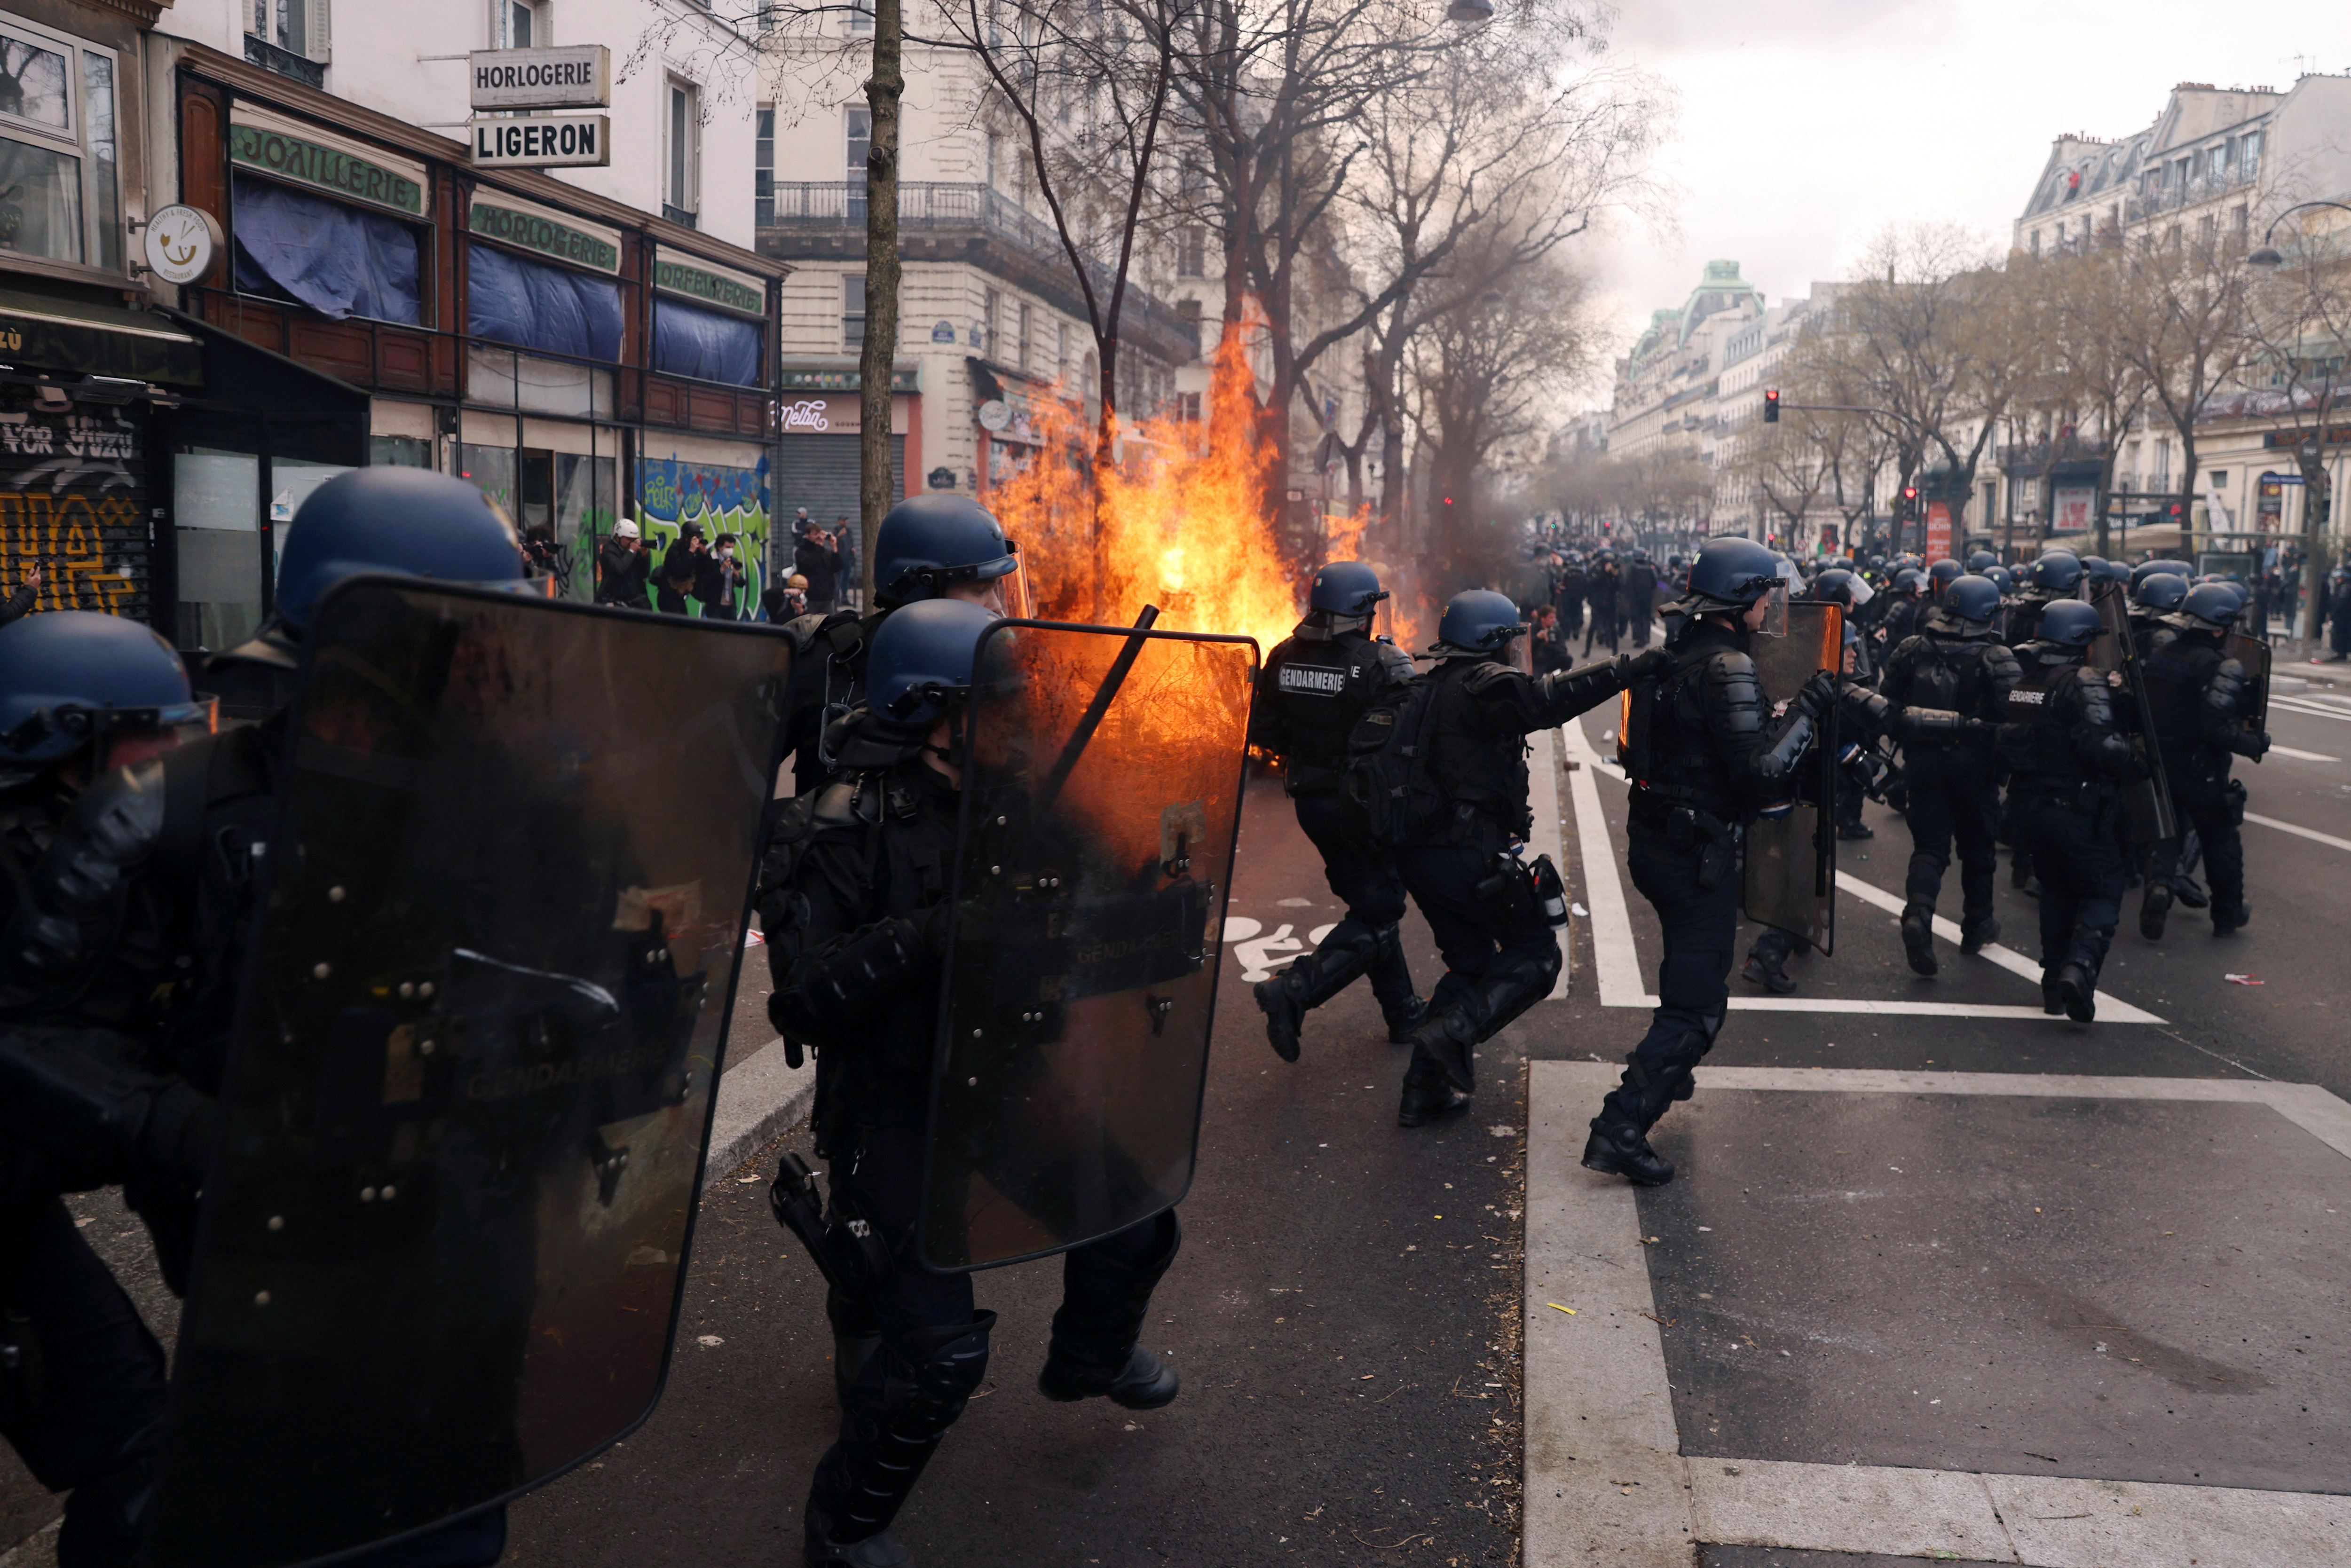 Ninth day of national strike and protest in France against the pension reform